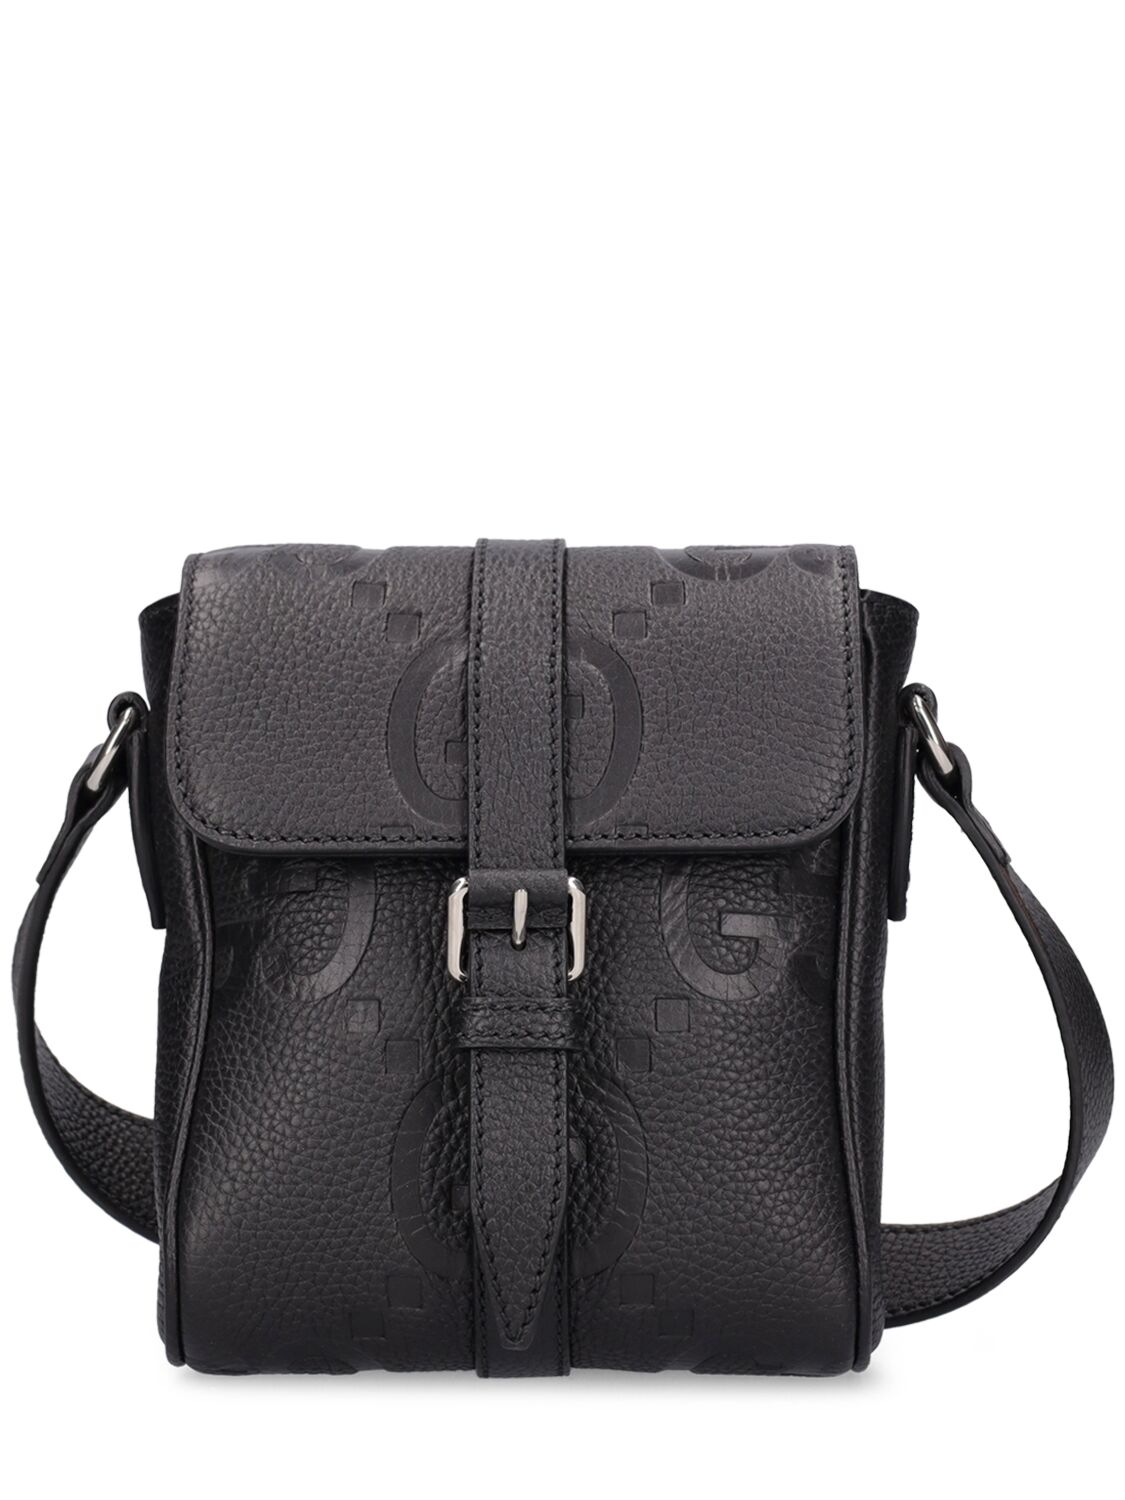 Image of Gg Small Leather Crossbody Bag